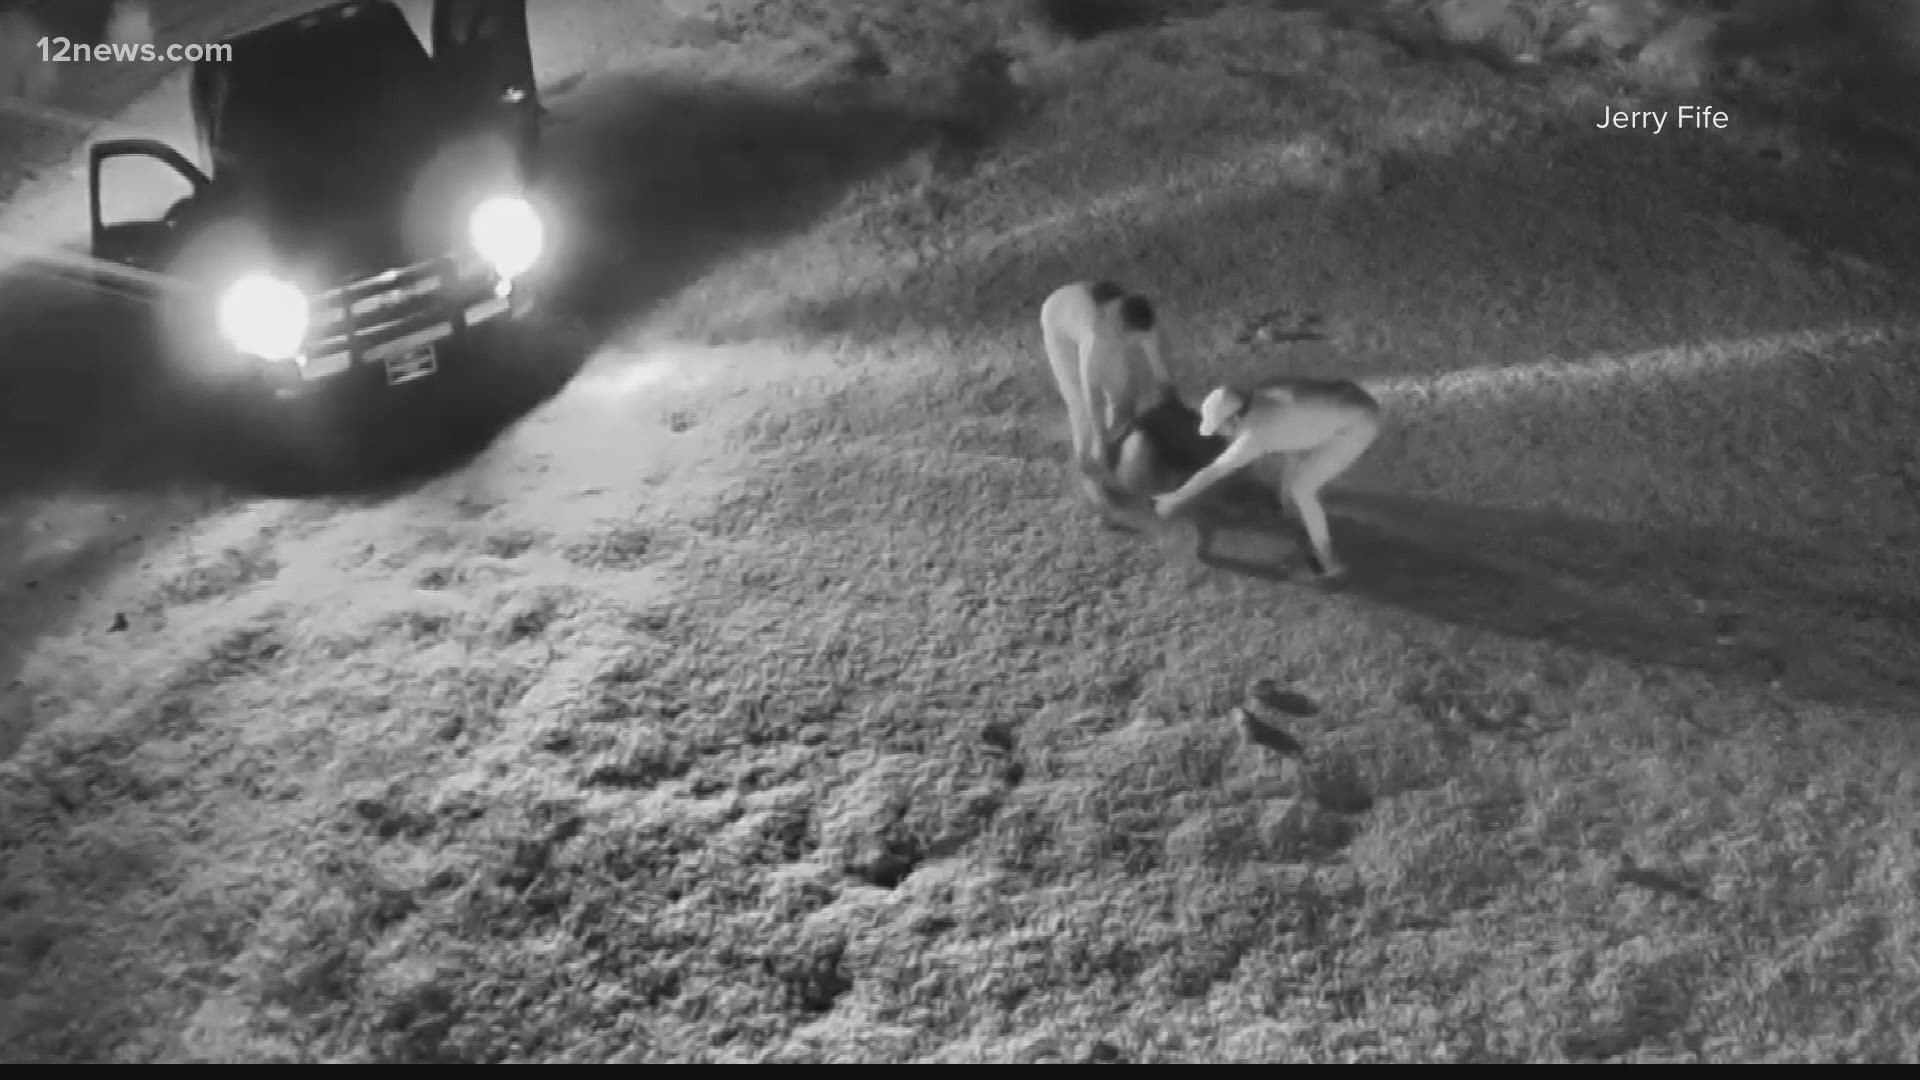 The whole incident was caught on Jerry Fife’s Ring camera and on his cell phone as he chased the thieves out of his yard.